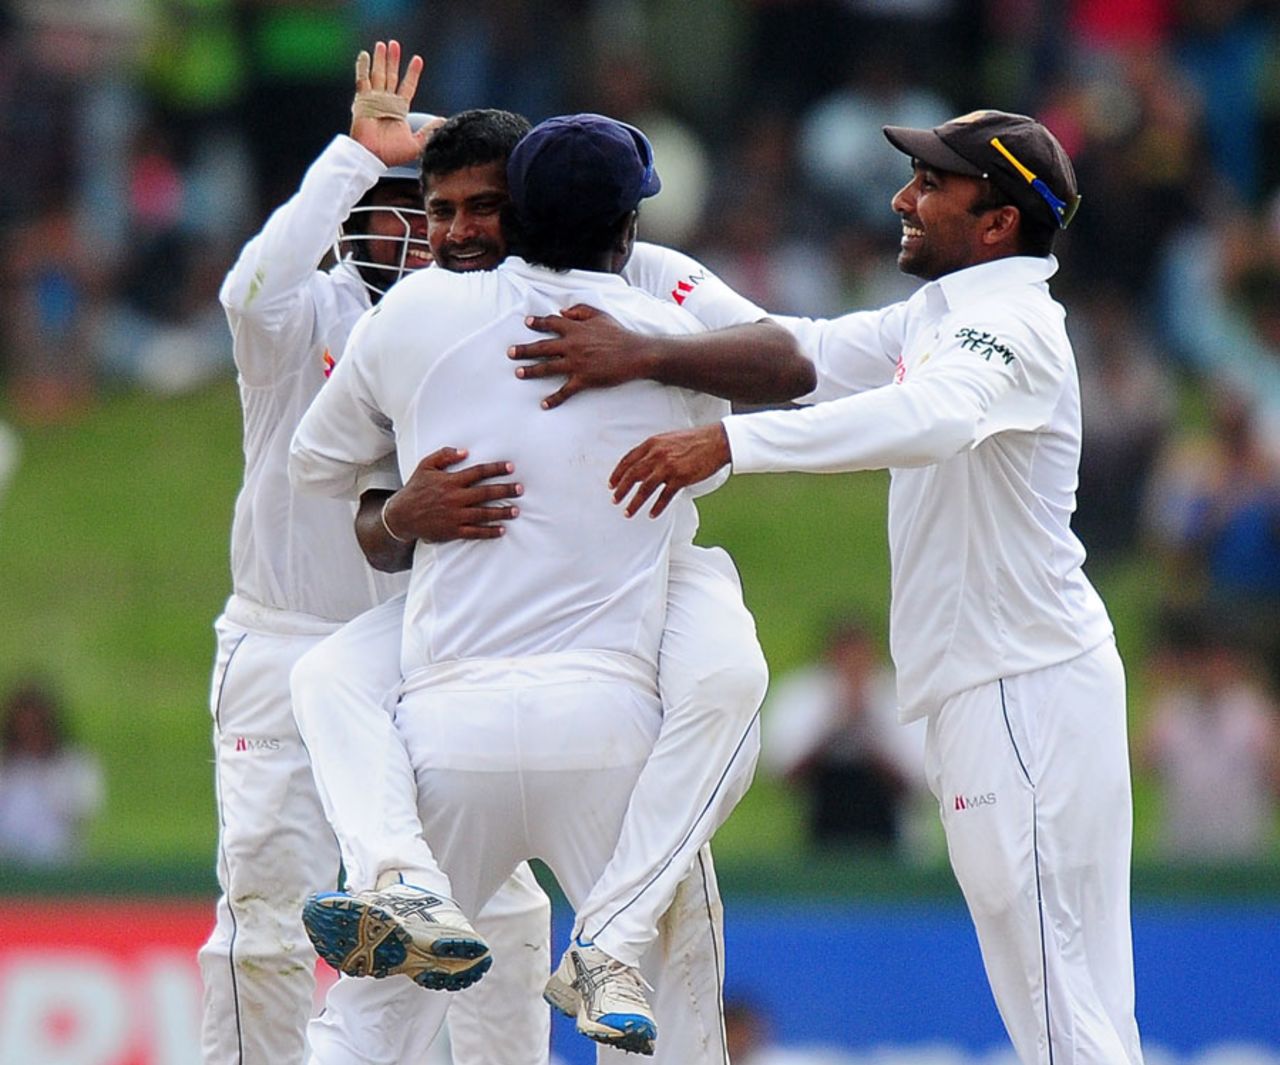 Rangana Herath was among the wickets again, Sri Lanka v Pakistan, 2nd Test, Colombo, 4th day, August 17, 2014